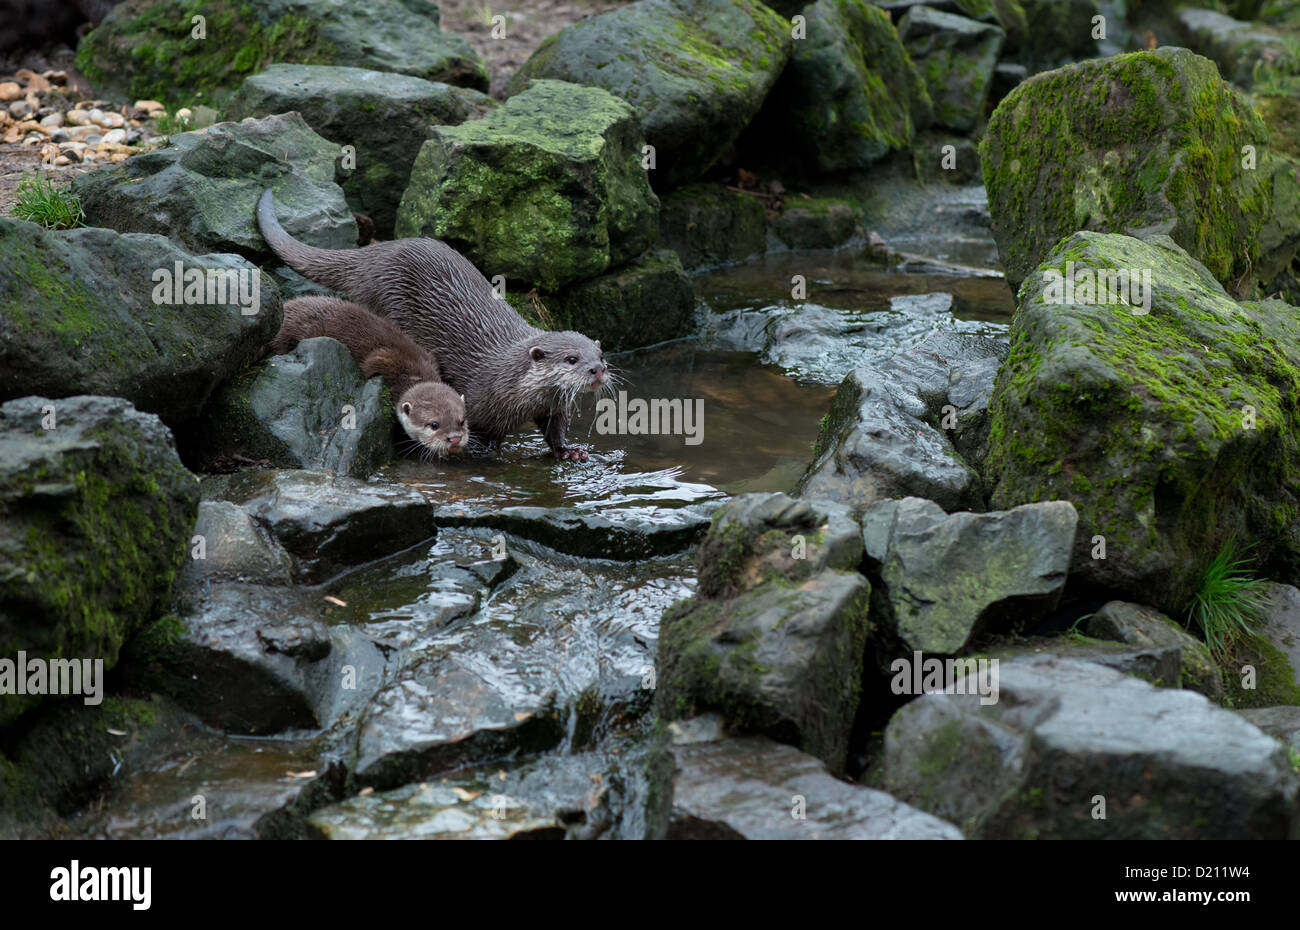 ASIAN SHORT-CLAWED OTTER OR ORIENTAL SMALL-CLAWED OTTER, Aonyx cinerea, WITH CUB. Stock Photo